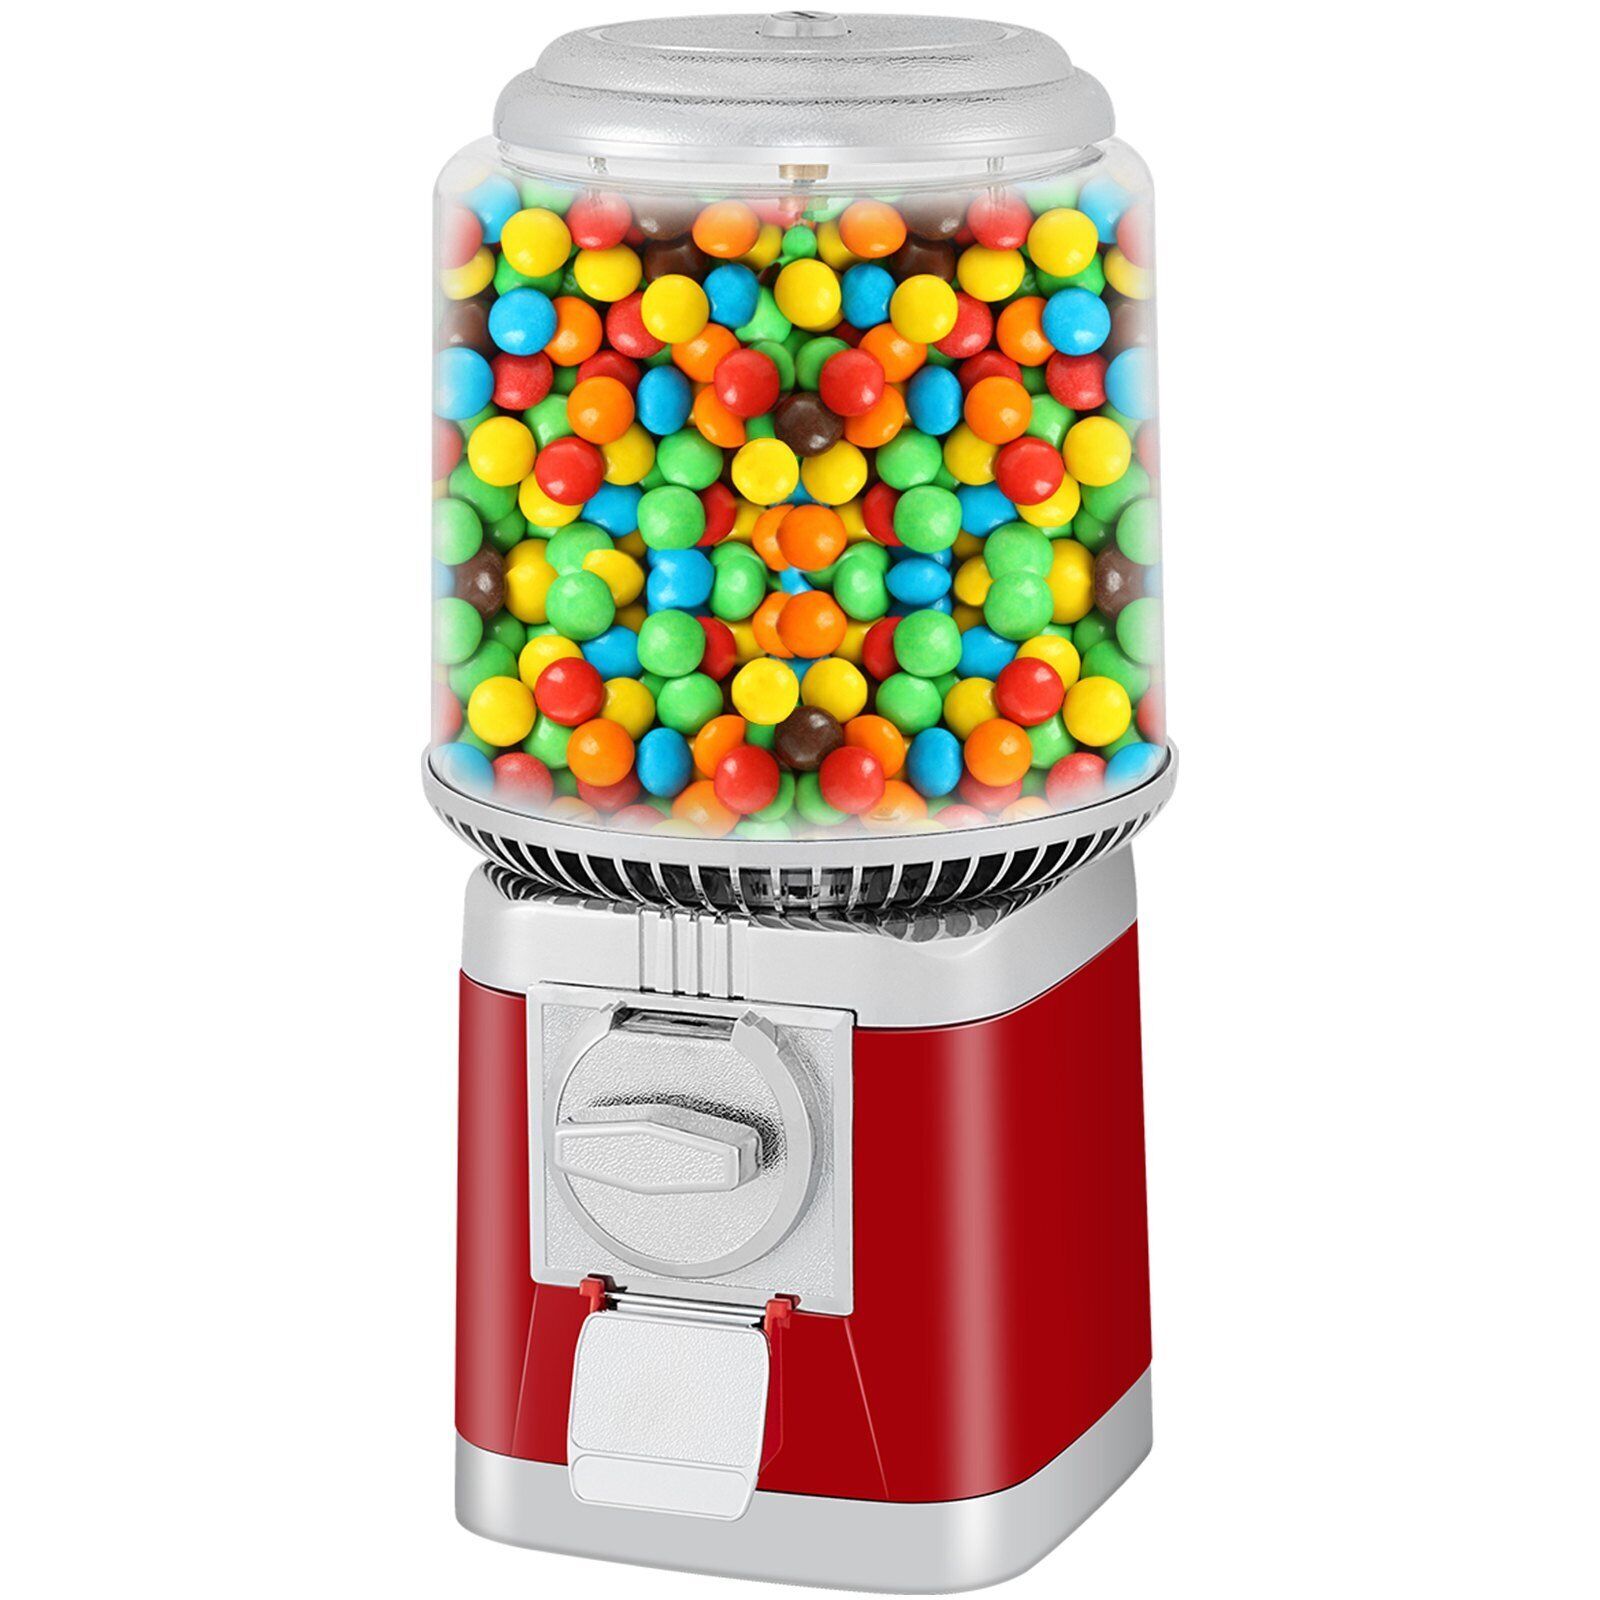 VEVOR Gumball Machine, 1-inch Candy Vending Machine, Commercial Gumball Vending